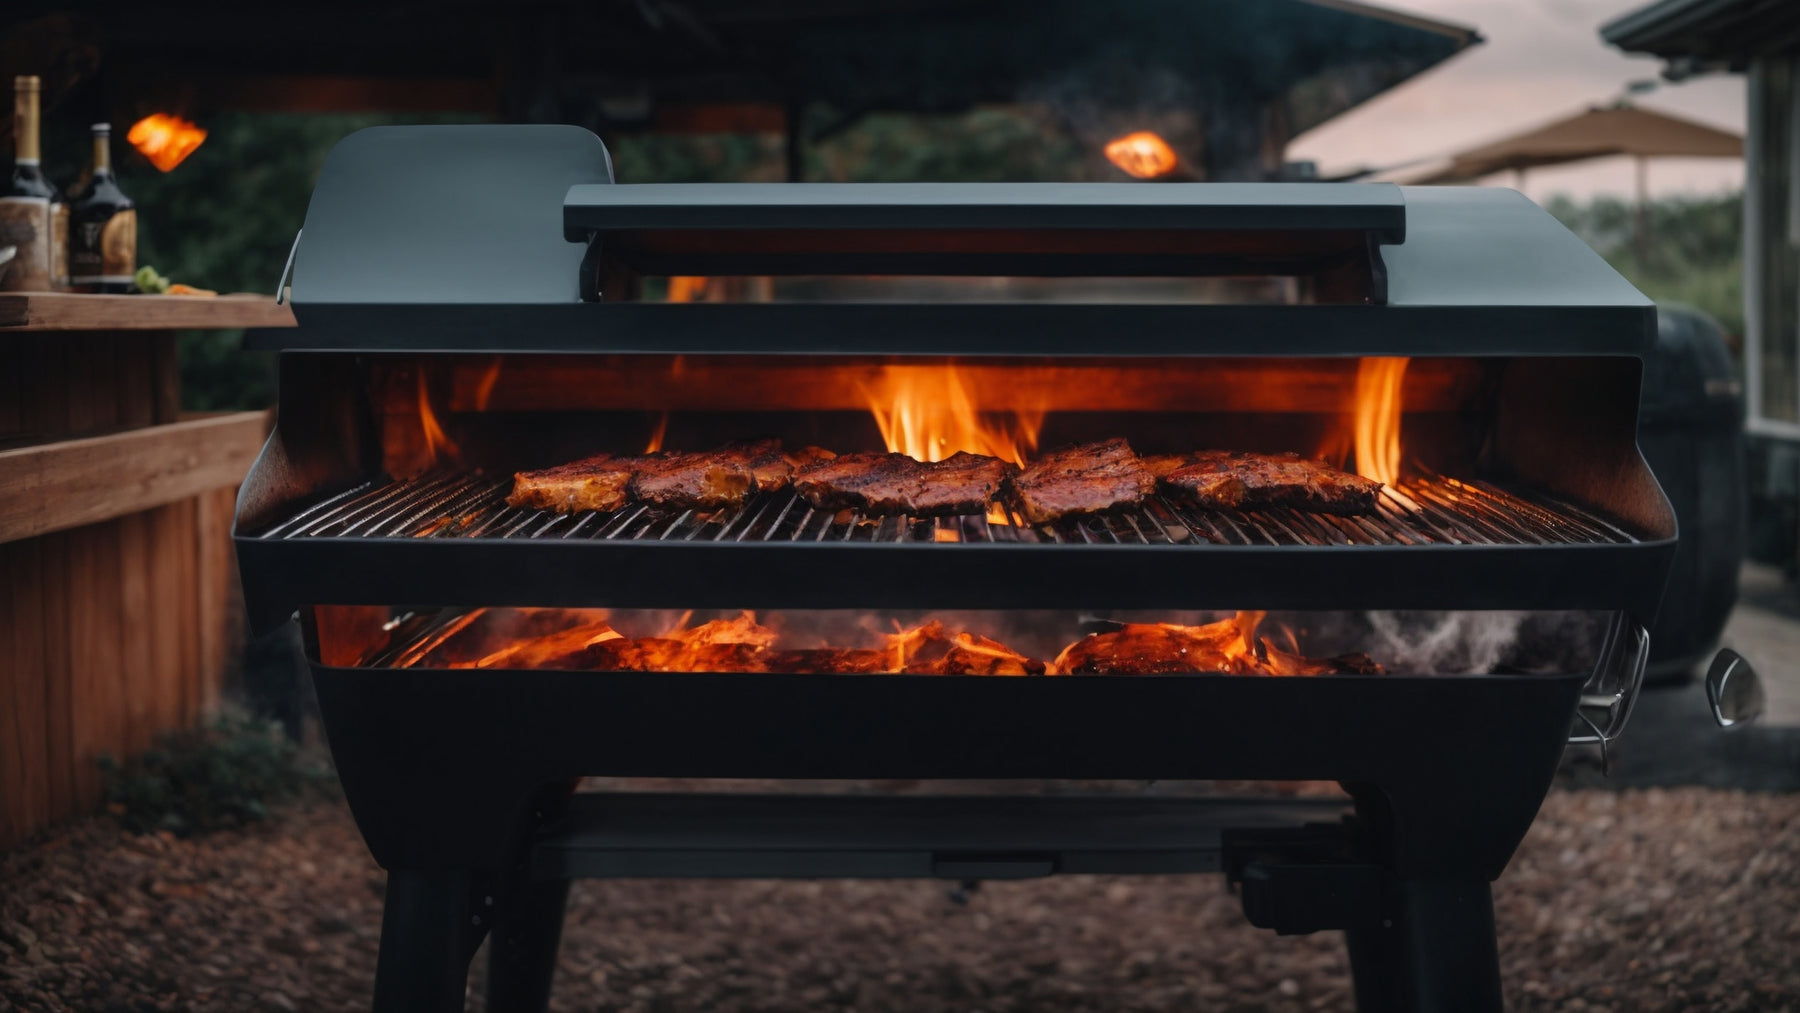 What is the best barbecue grill on the market today?